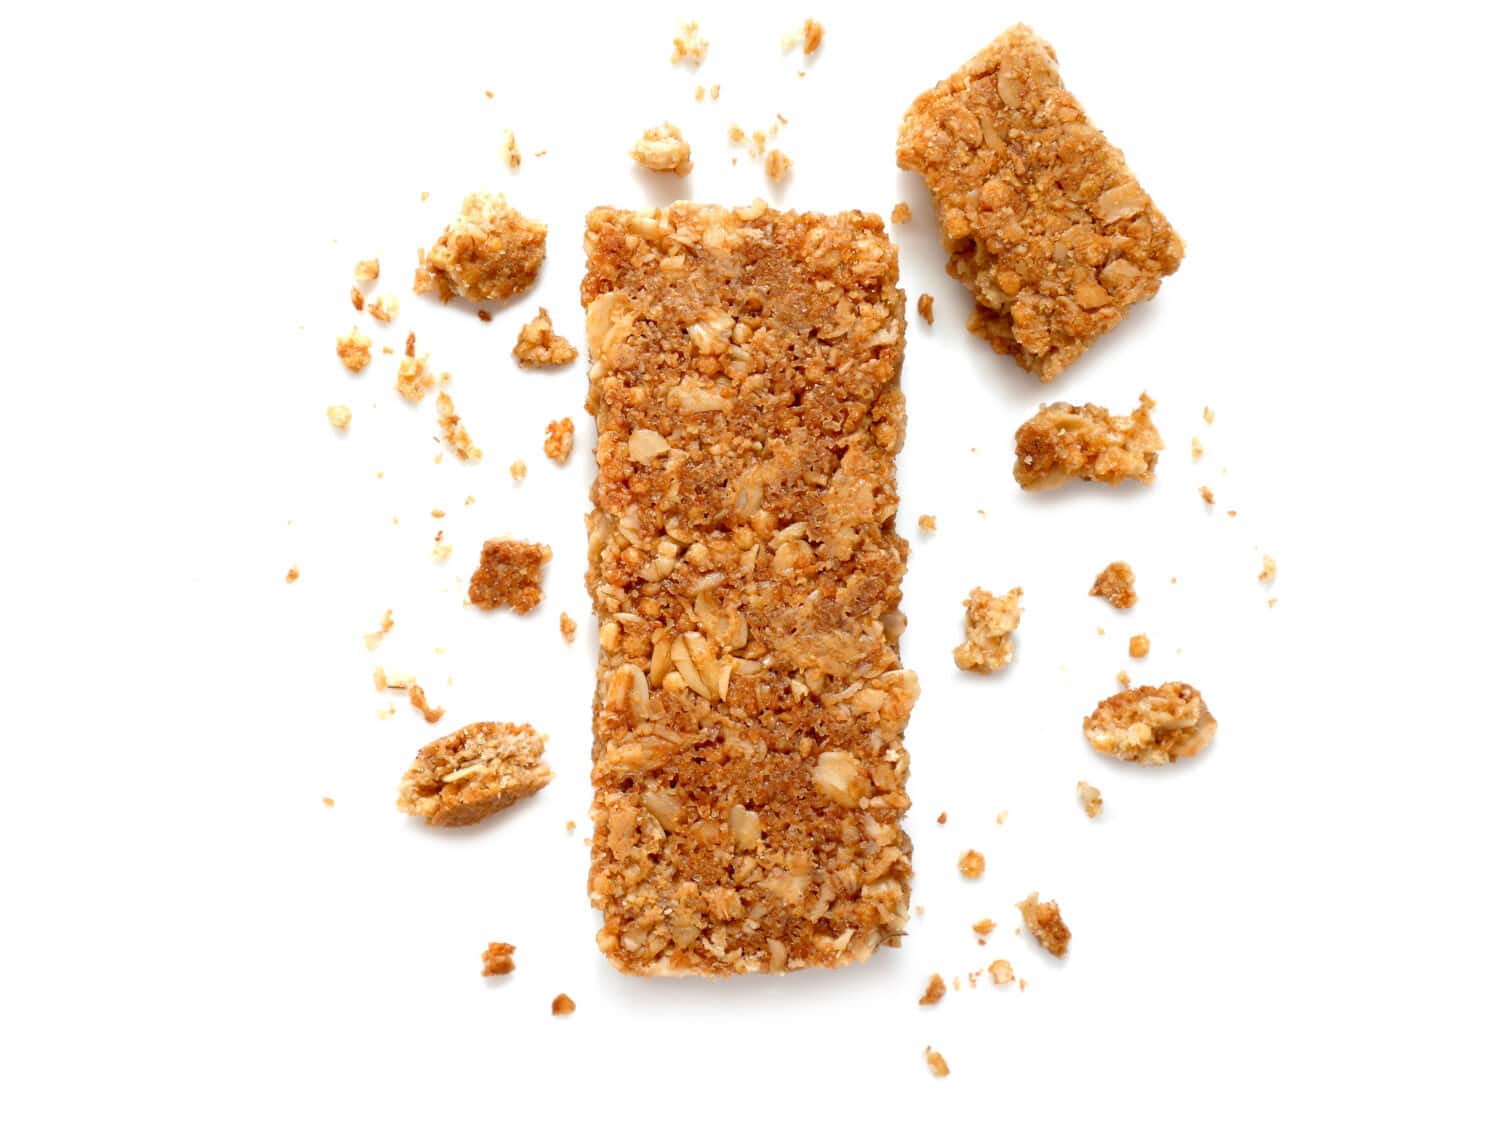 Cereal bars or flapjacks made from rolled oats with crumbs isolated on white background. Top view.